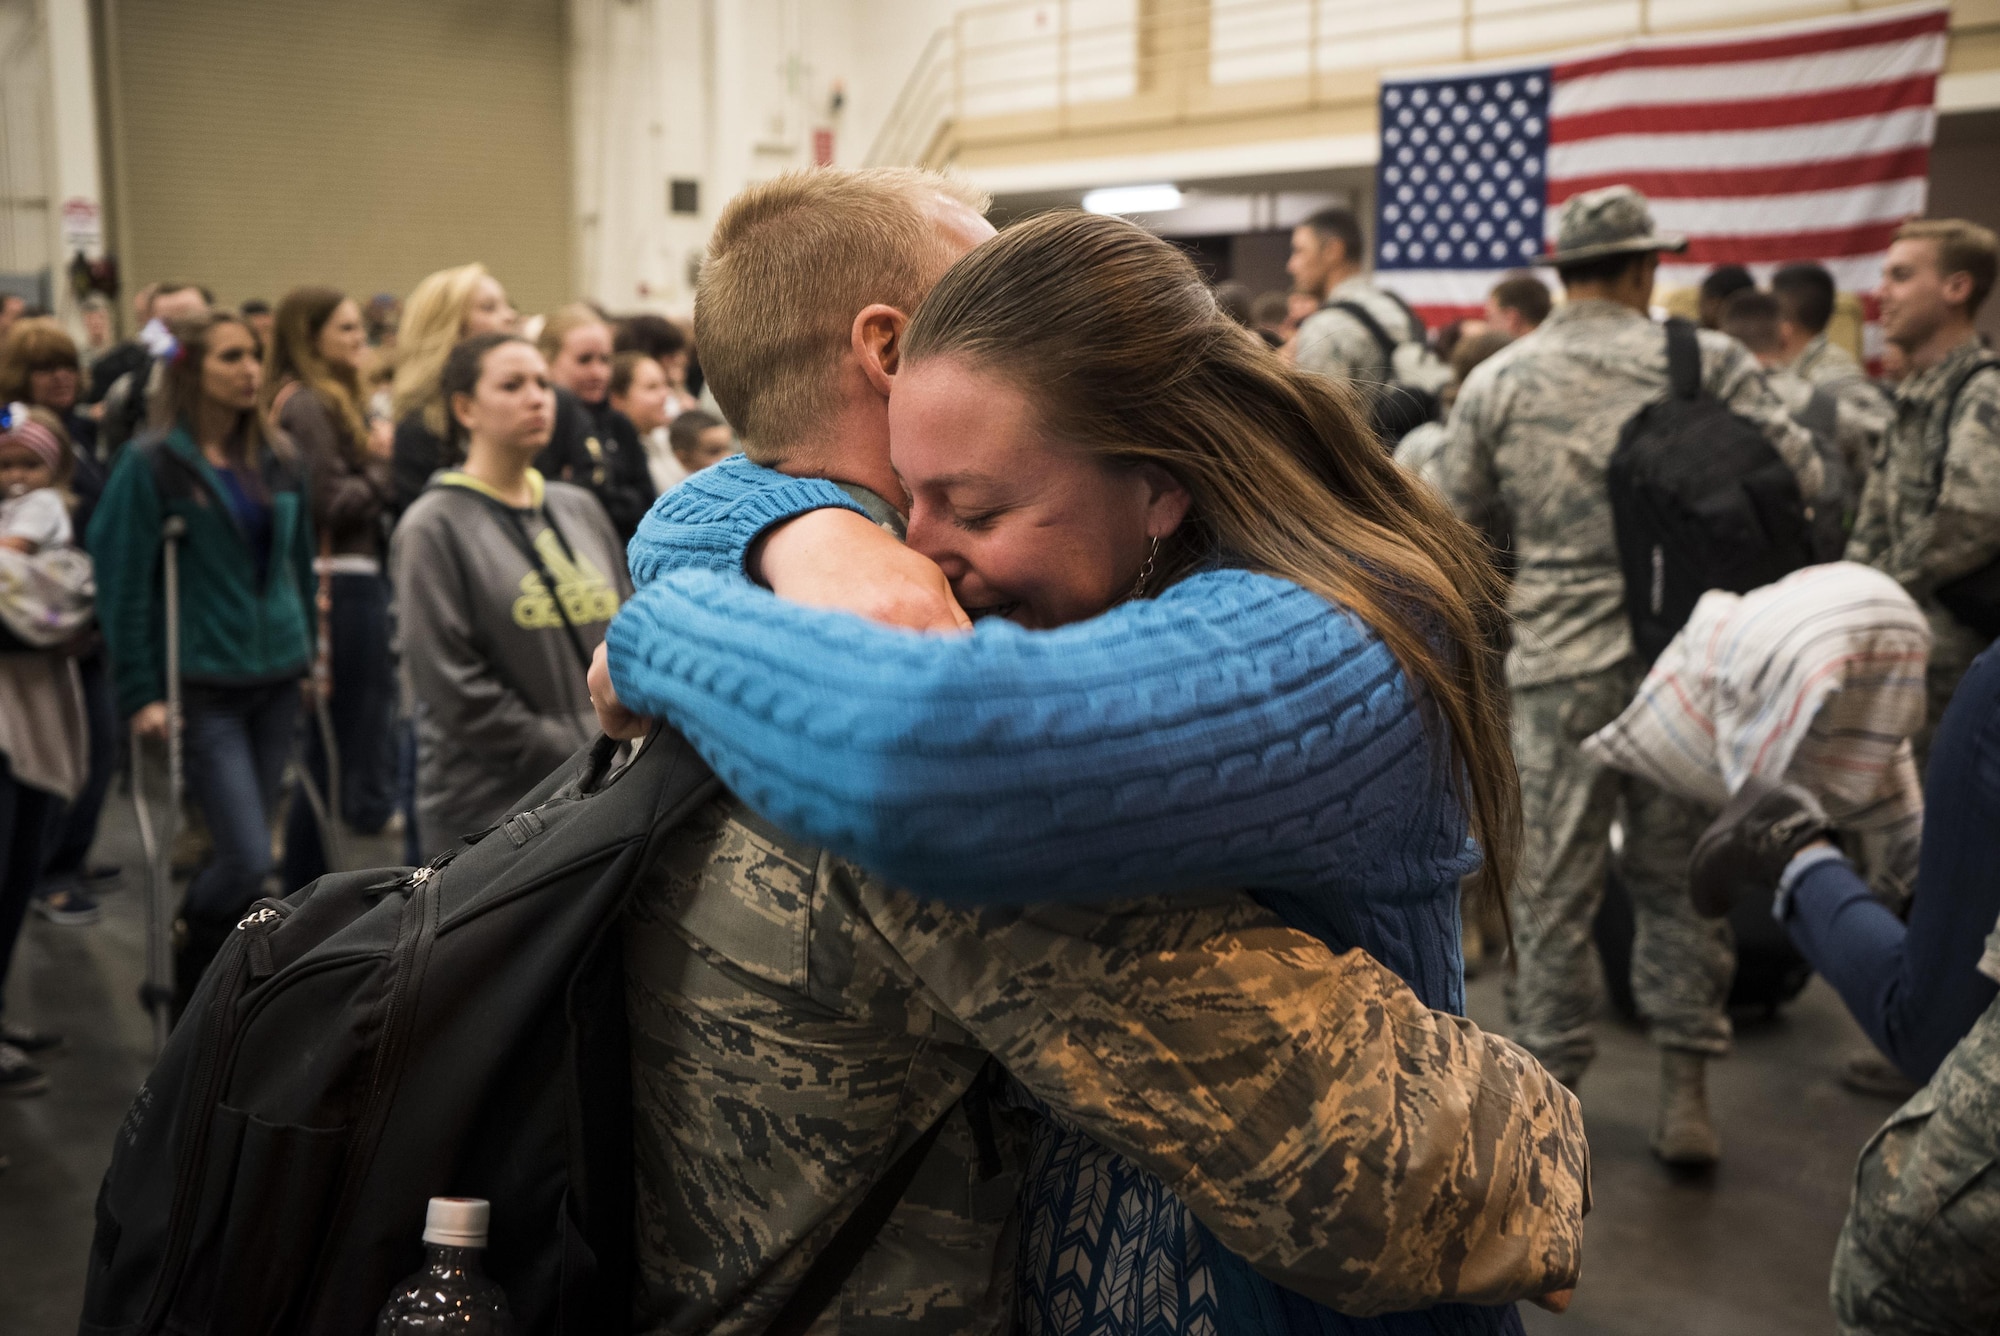 Capt. Torrance Barach, 726th Air Control Squadron, reunites with his wife at Mountain Home Air Force Base, Idaho, April 22, 2017. The 726th ACS set up tables, games, food and movies for the families waiting for their loved ones. (U.S. Air Force photo/Staff Sgt. Samuel Morse)